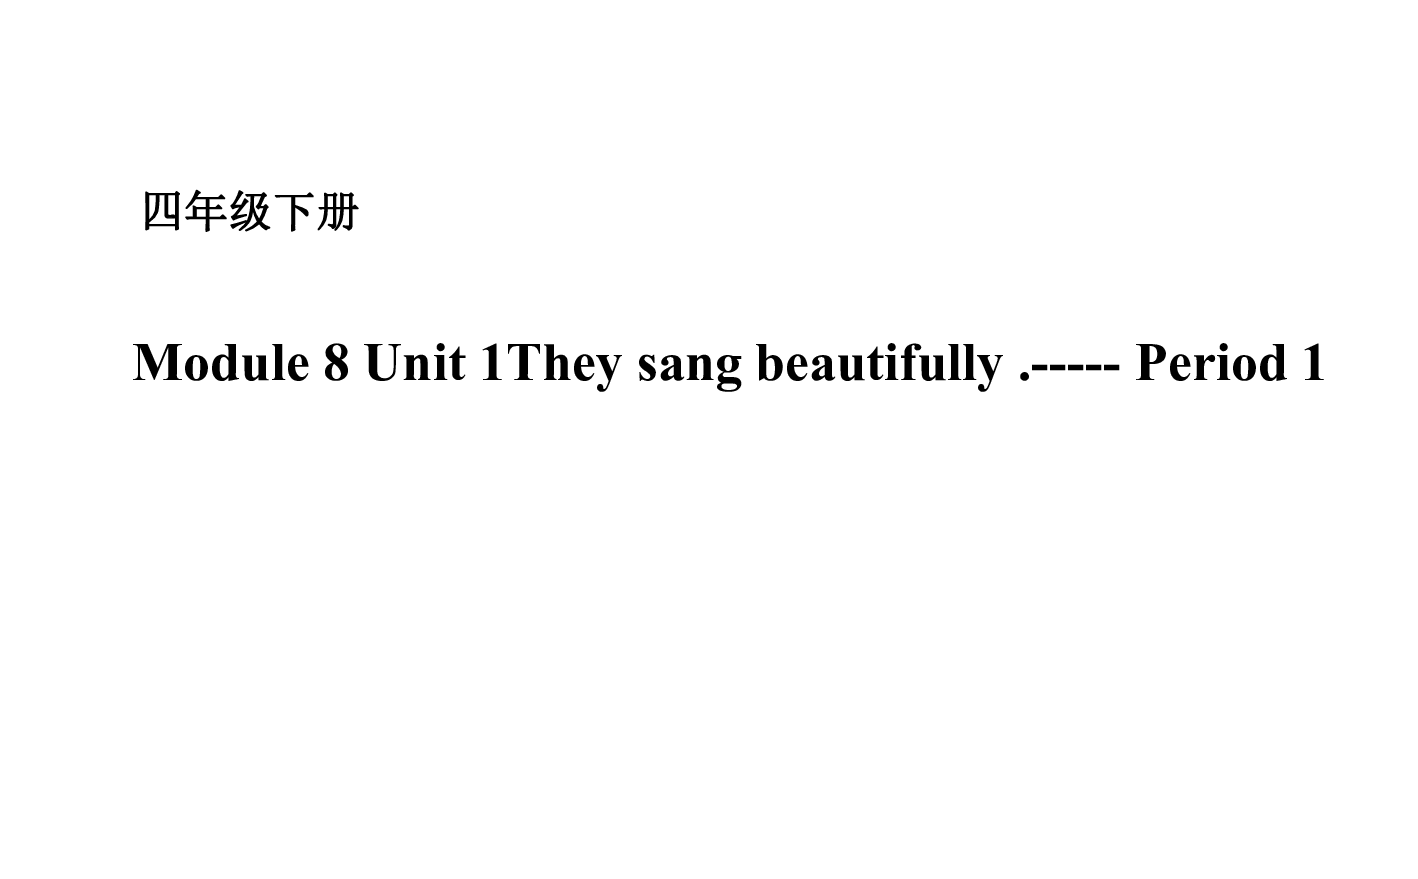 Module 8 Unit 1 They sang beautifully-Period 1 课件+素材 26张PPT